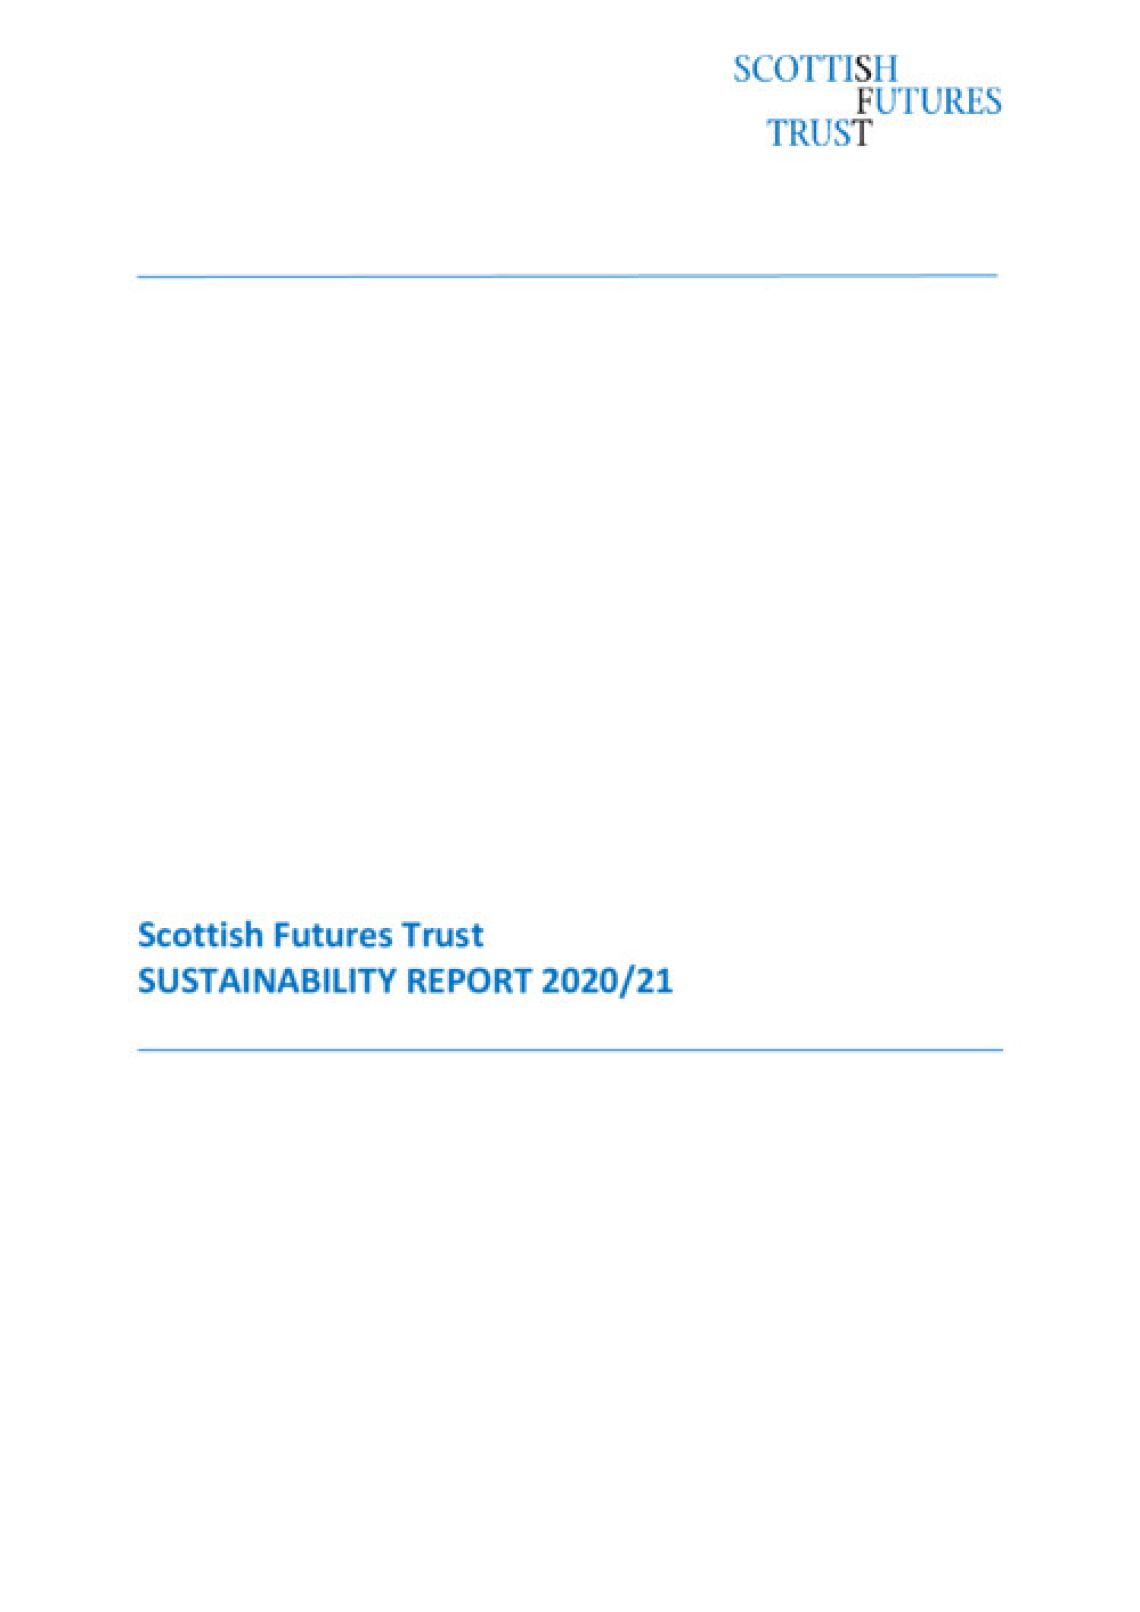 SFT Sustainability Report 2020 - 2021 cover